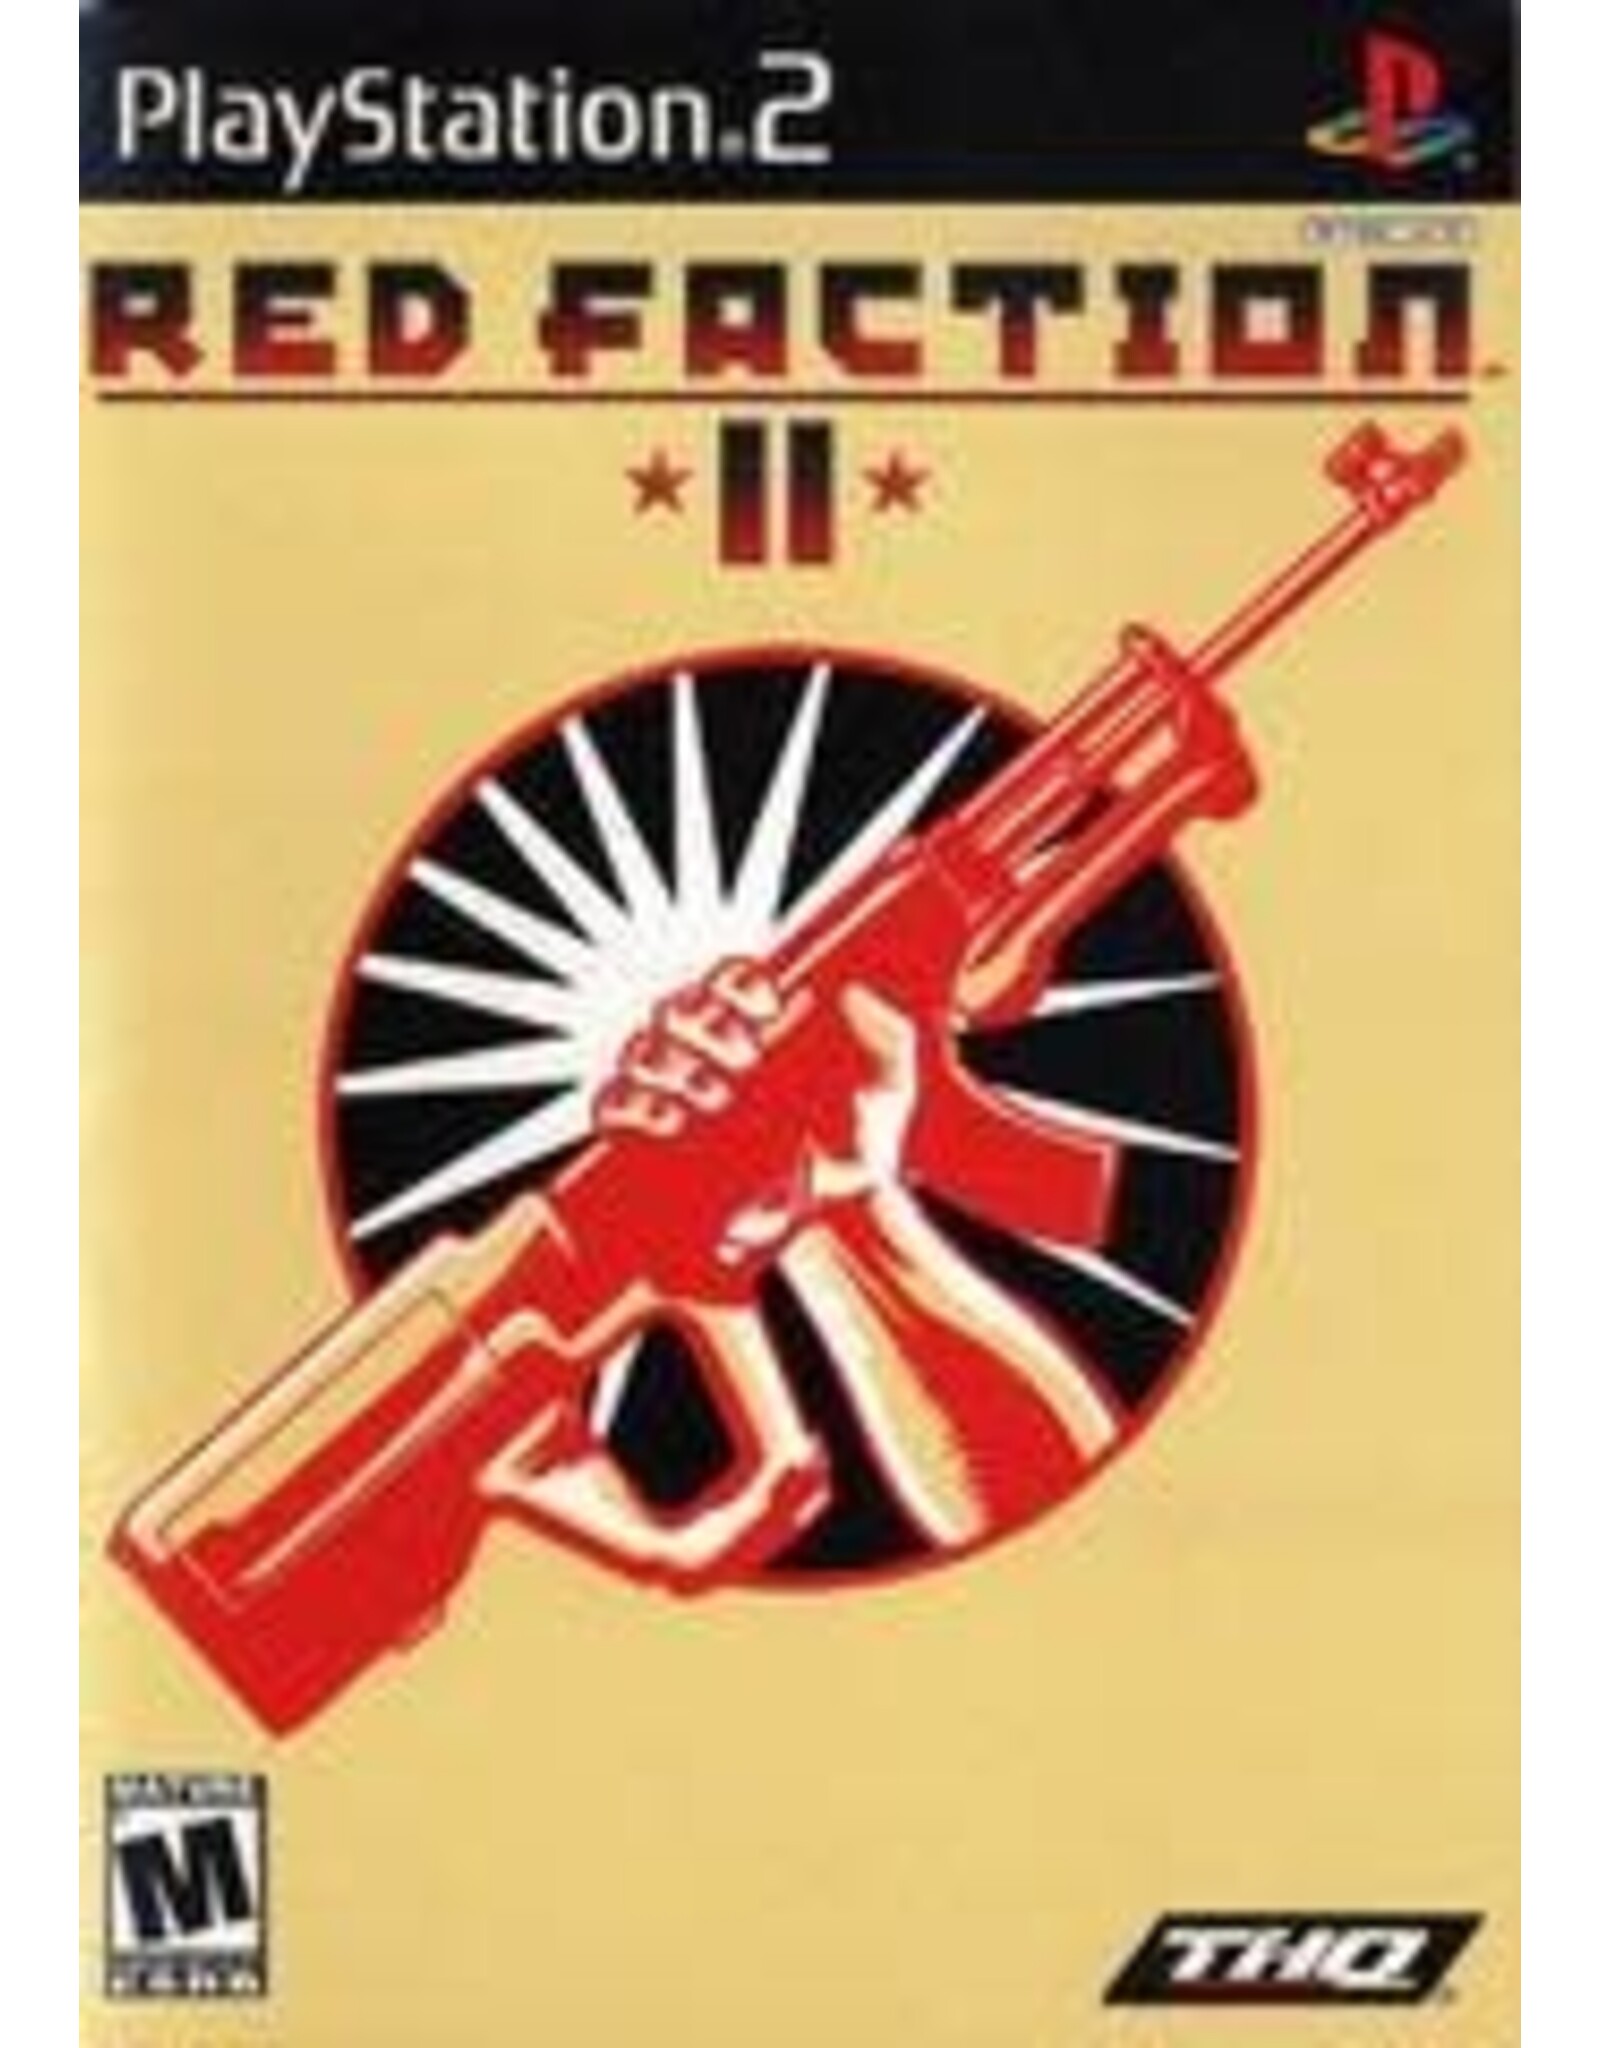 Playstation 2 Red Faction II (Used)